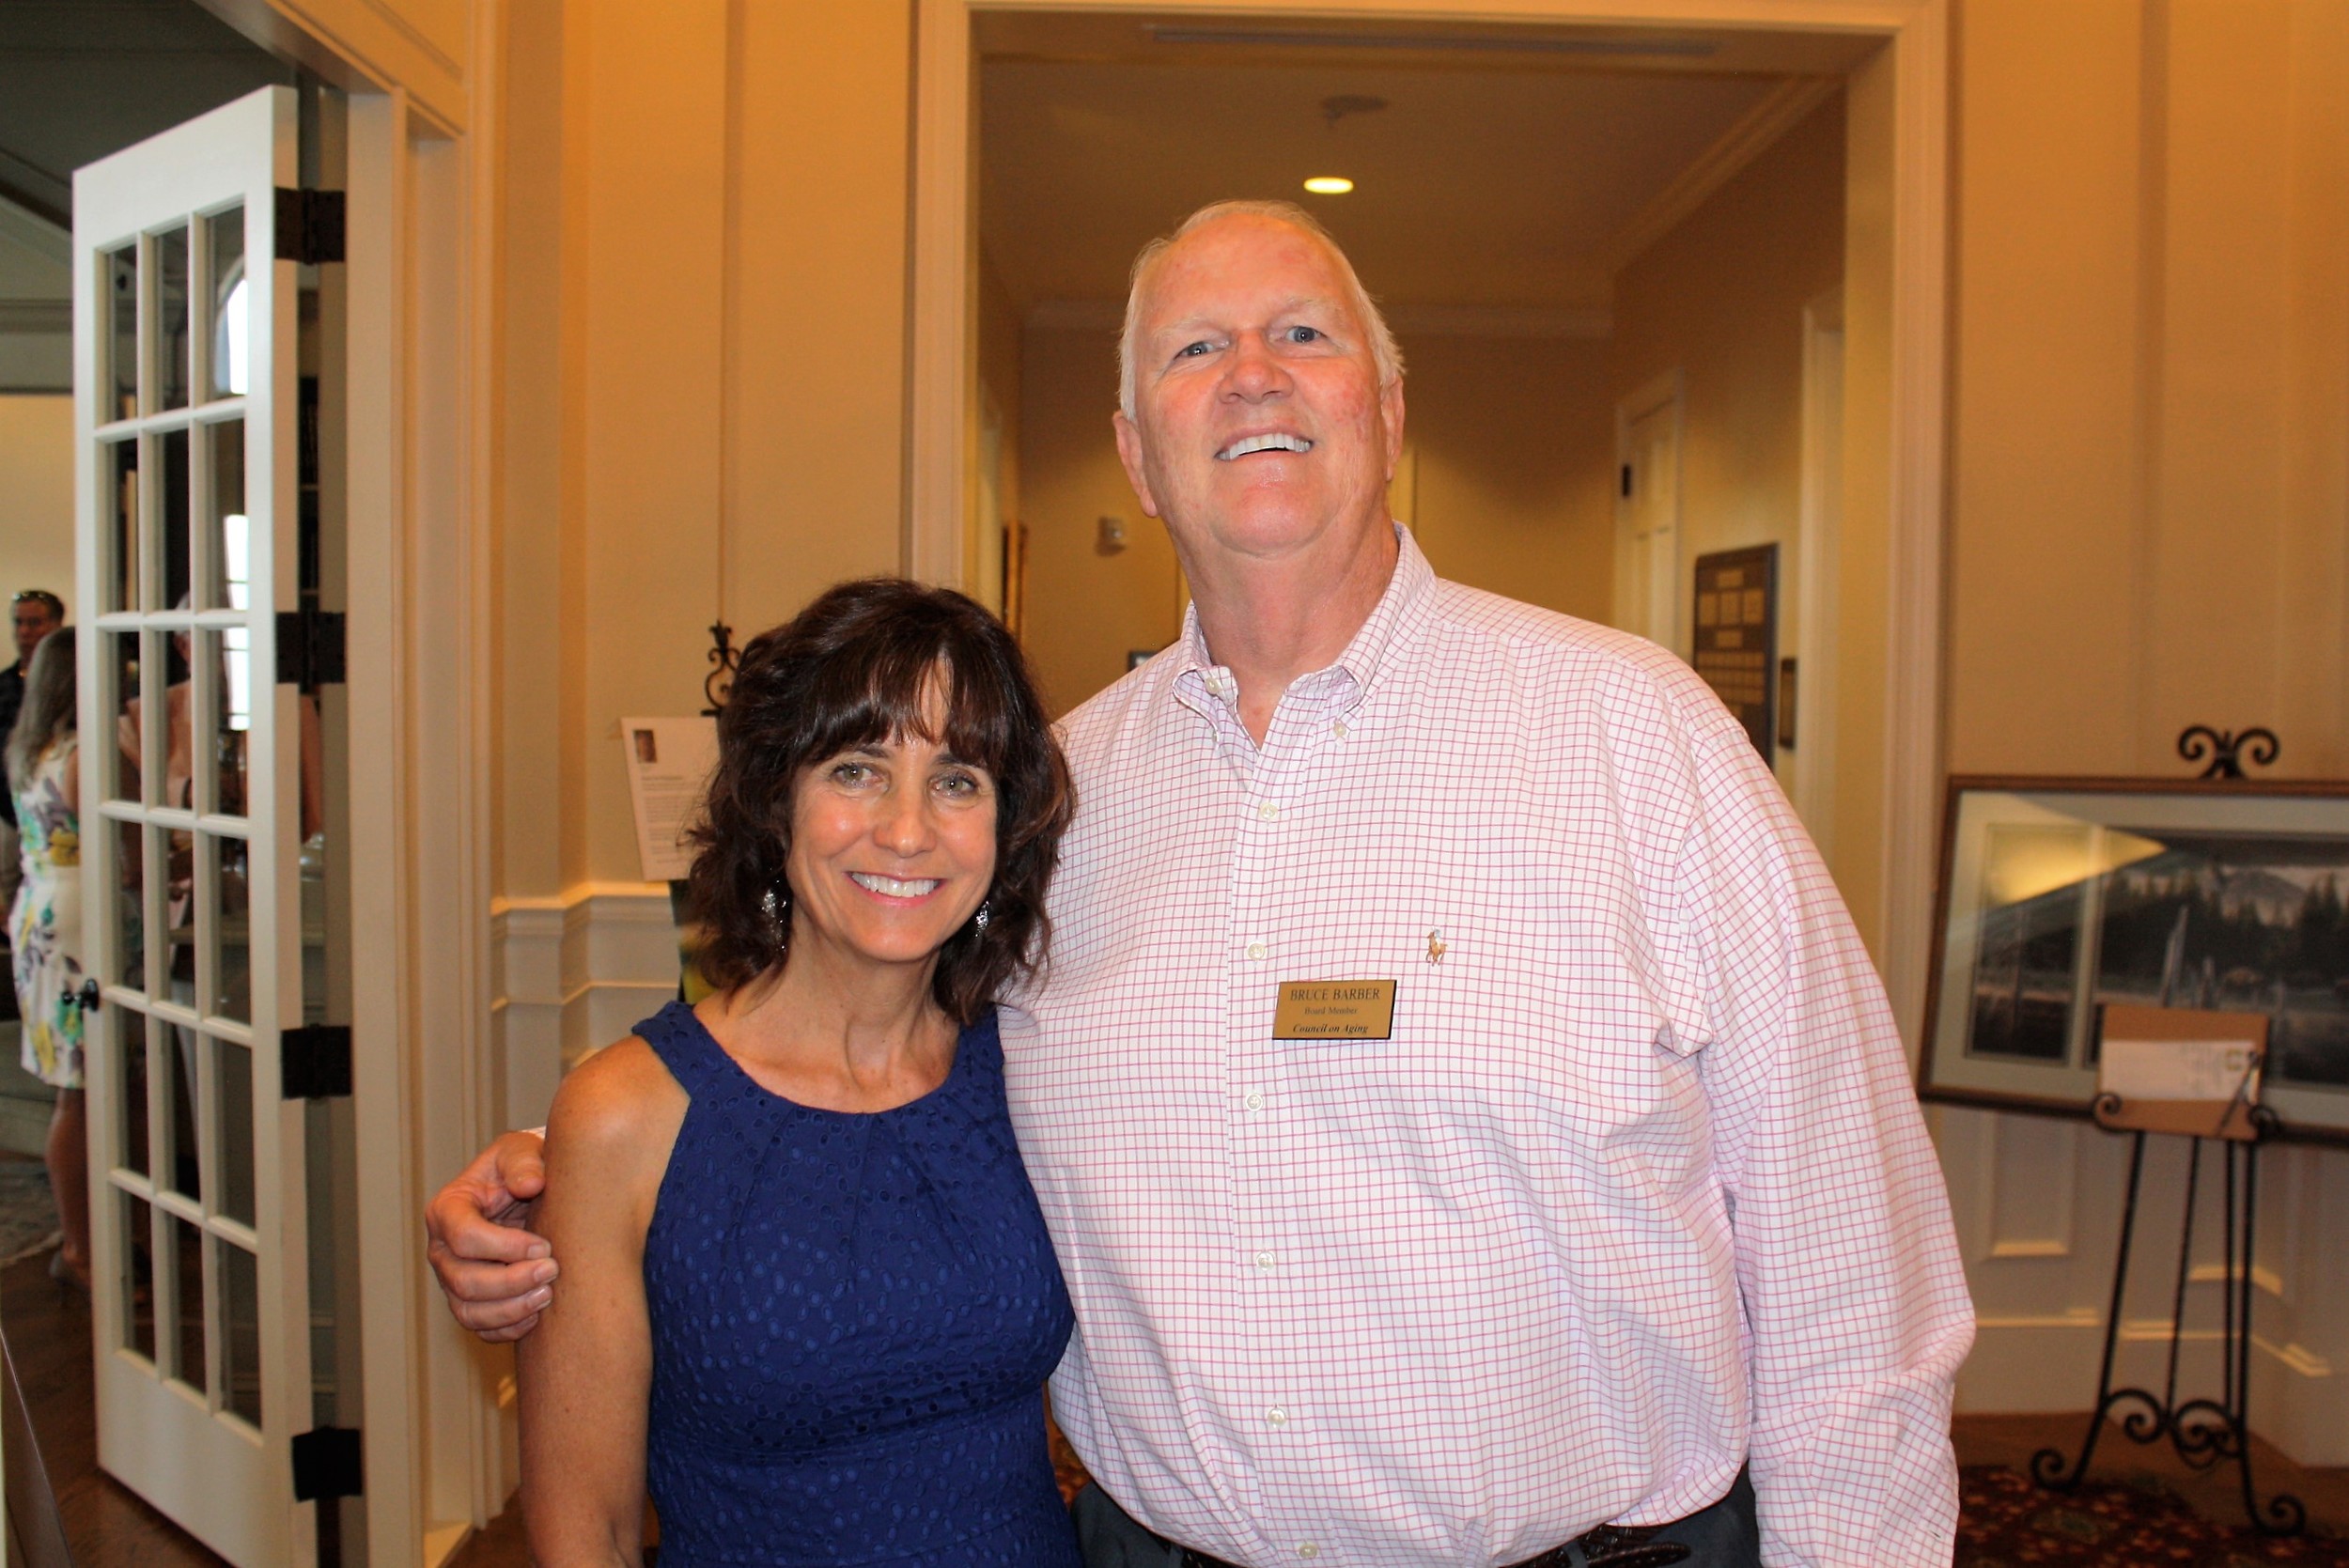 Council on Aging Executive Director Becky Yanni and board member Bruce Barber